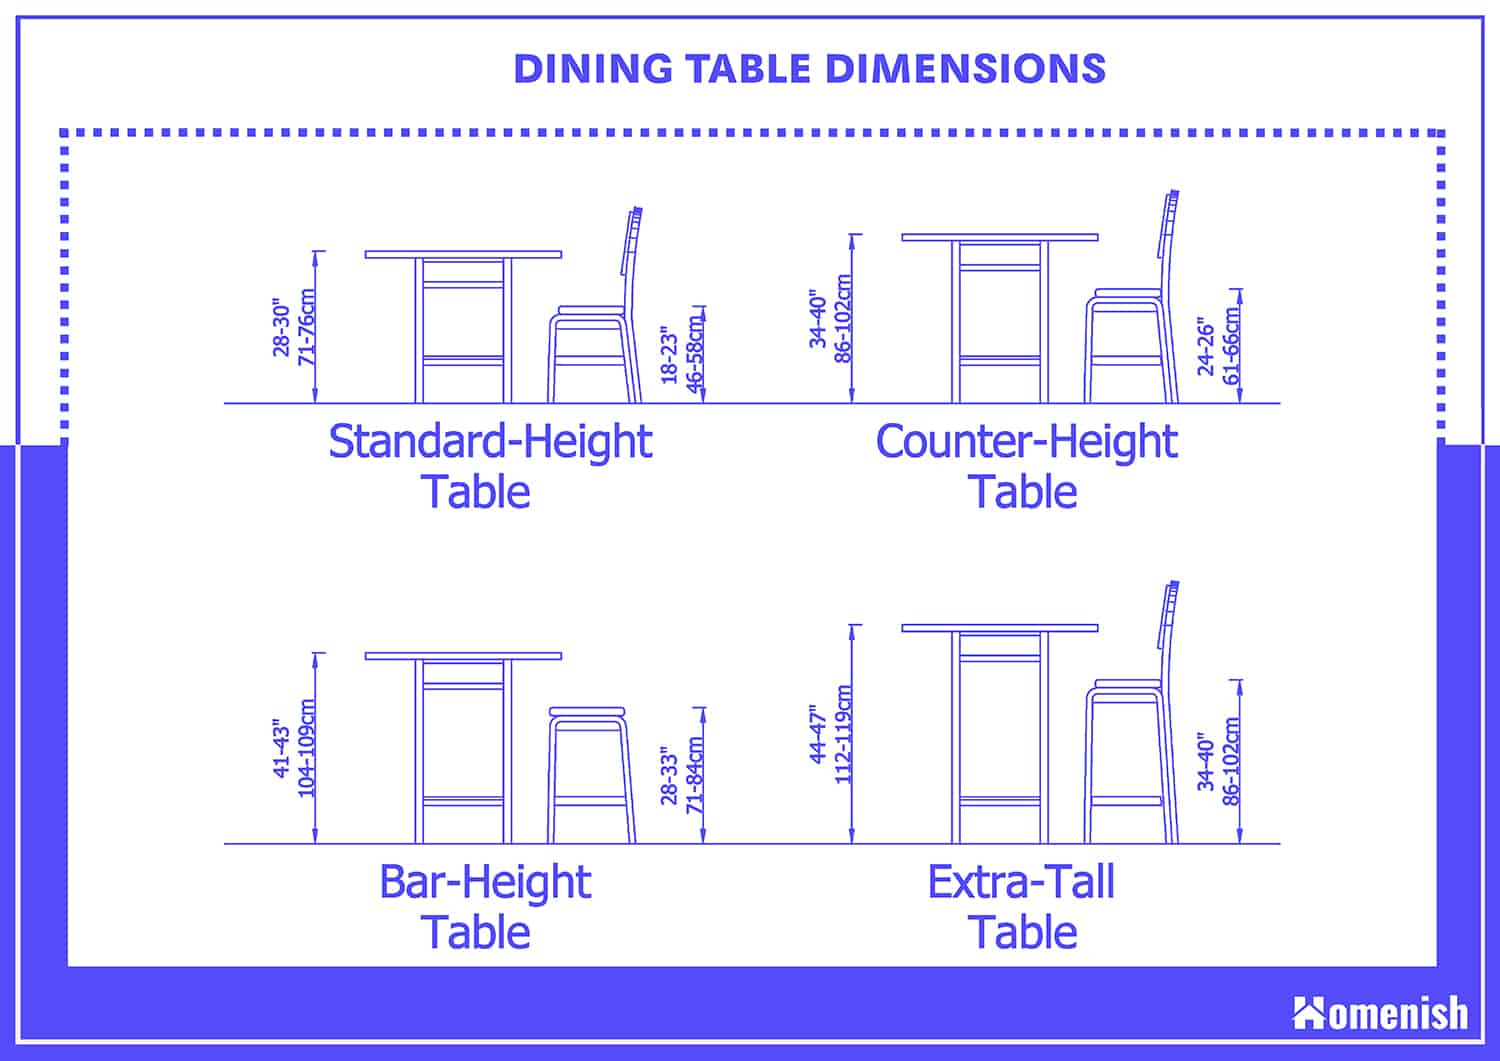 Standard Dining Table Dimensions, What Size Is A Normal Dining Room Table